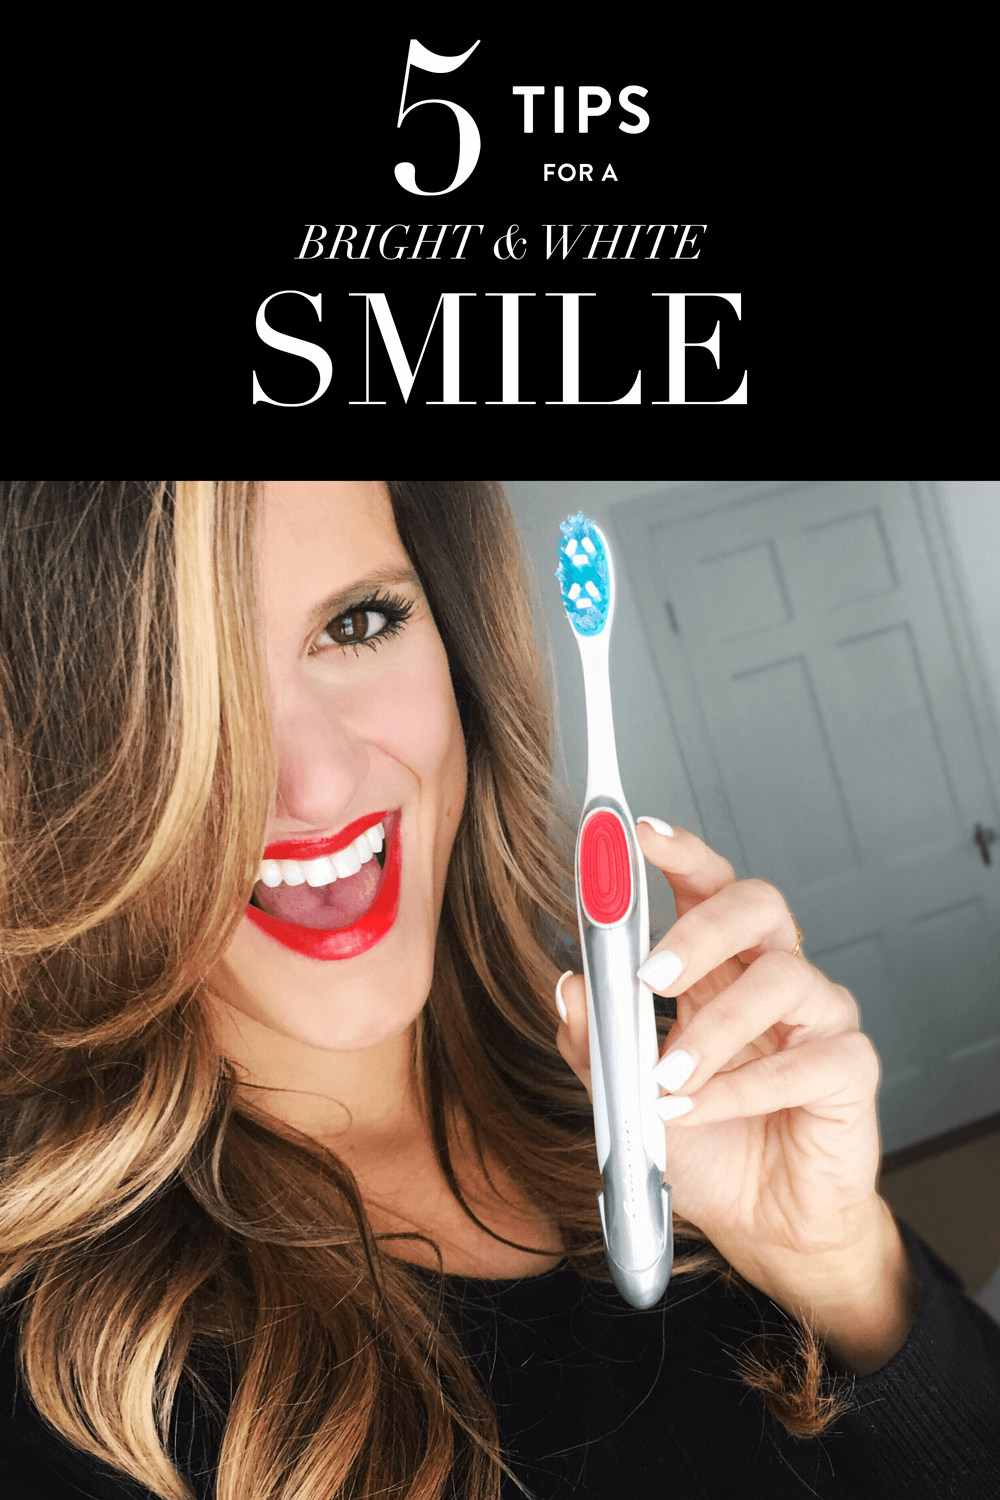 Tips for Maintaining white teeth, how to keep your teeth white and your smile bright